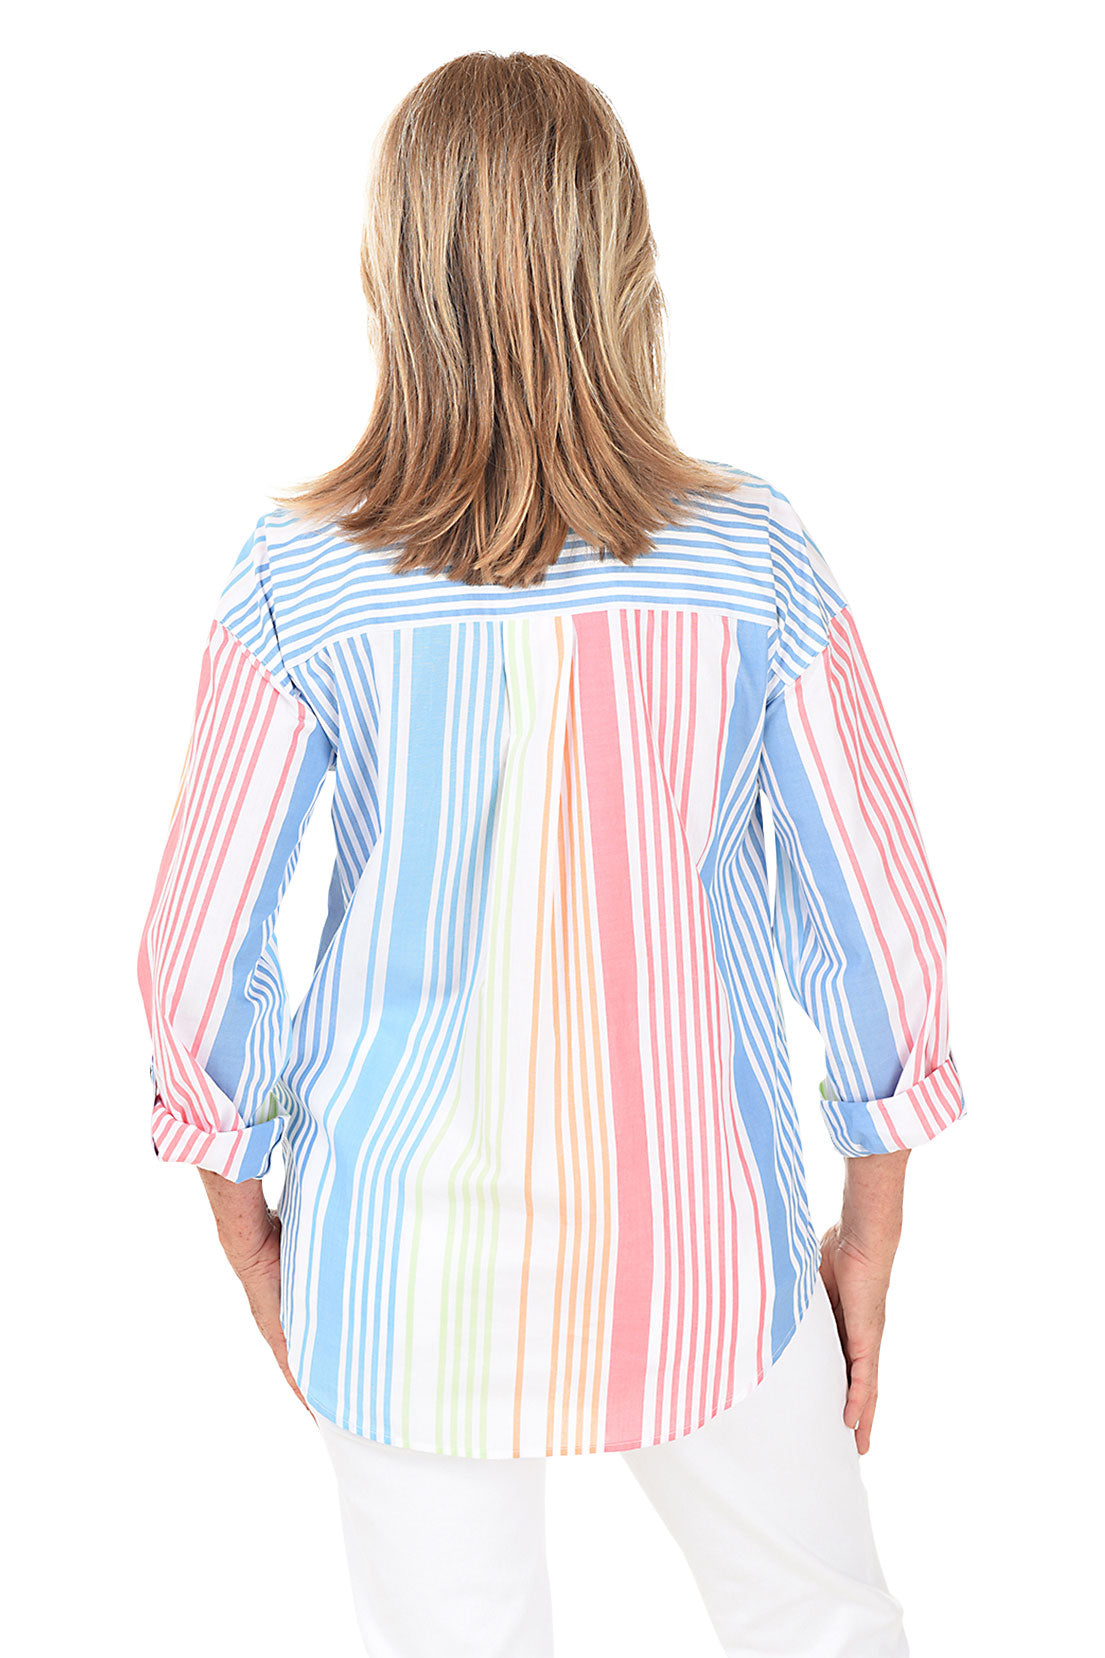 Patio Party Colorful Striped Cotton Shirt